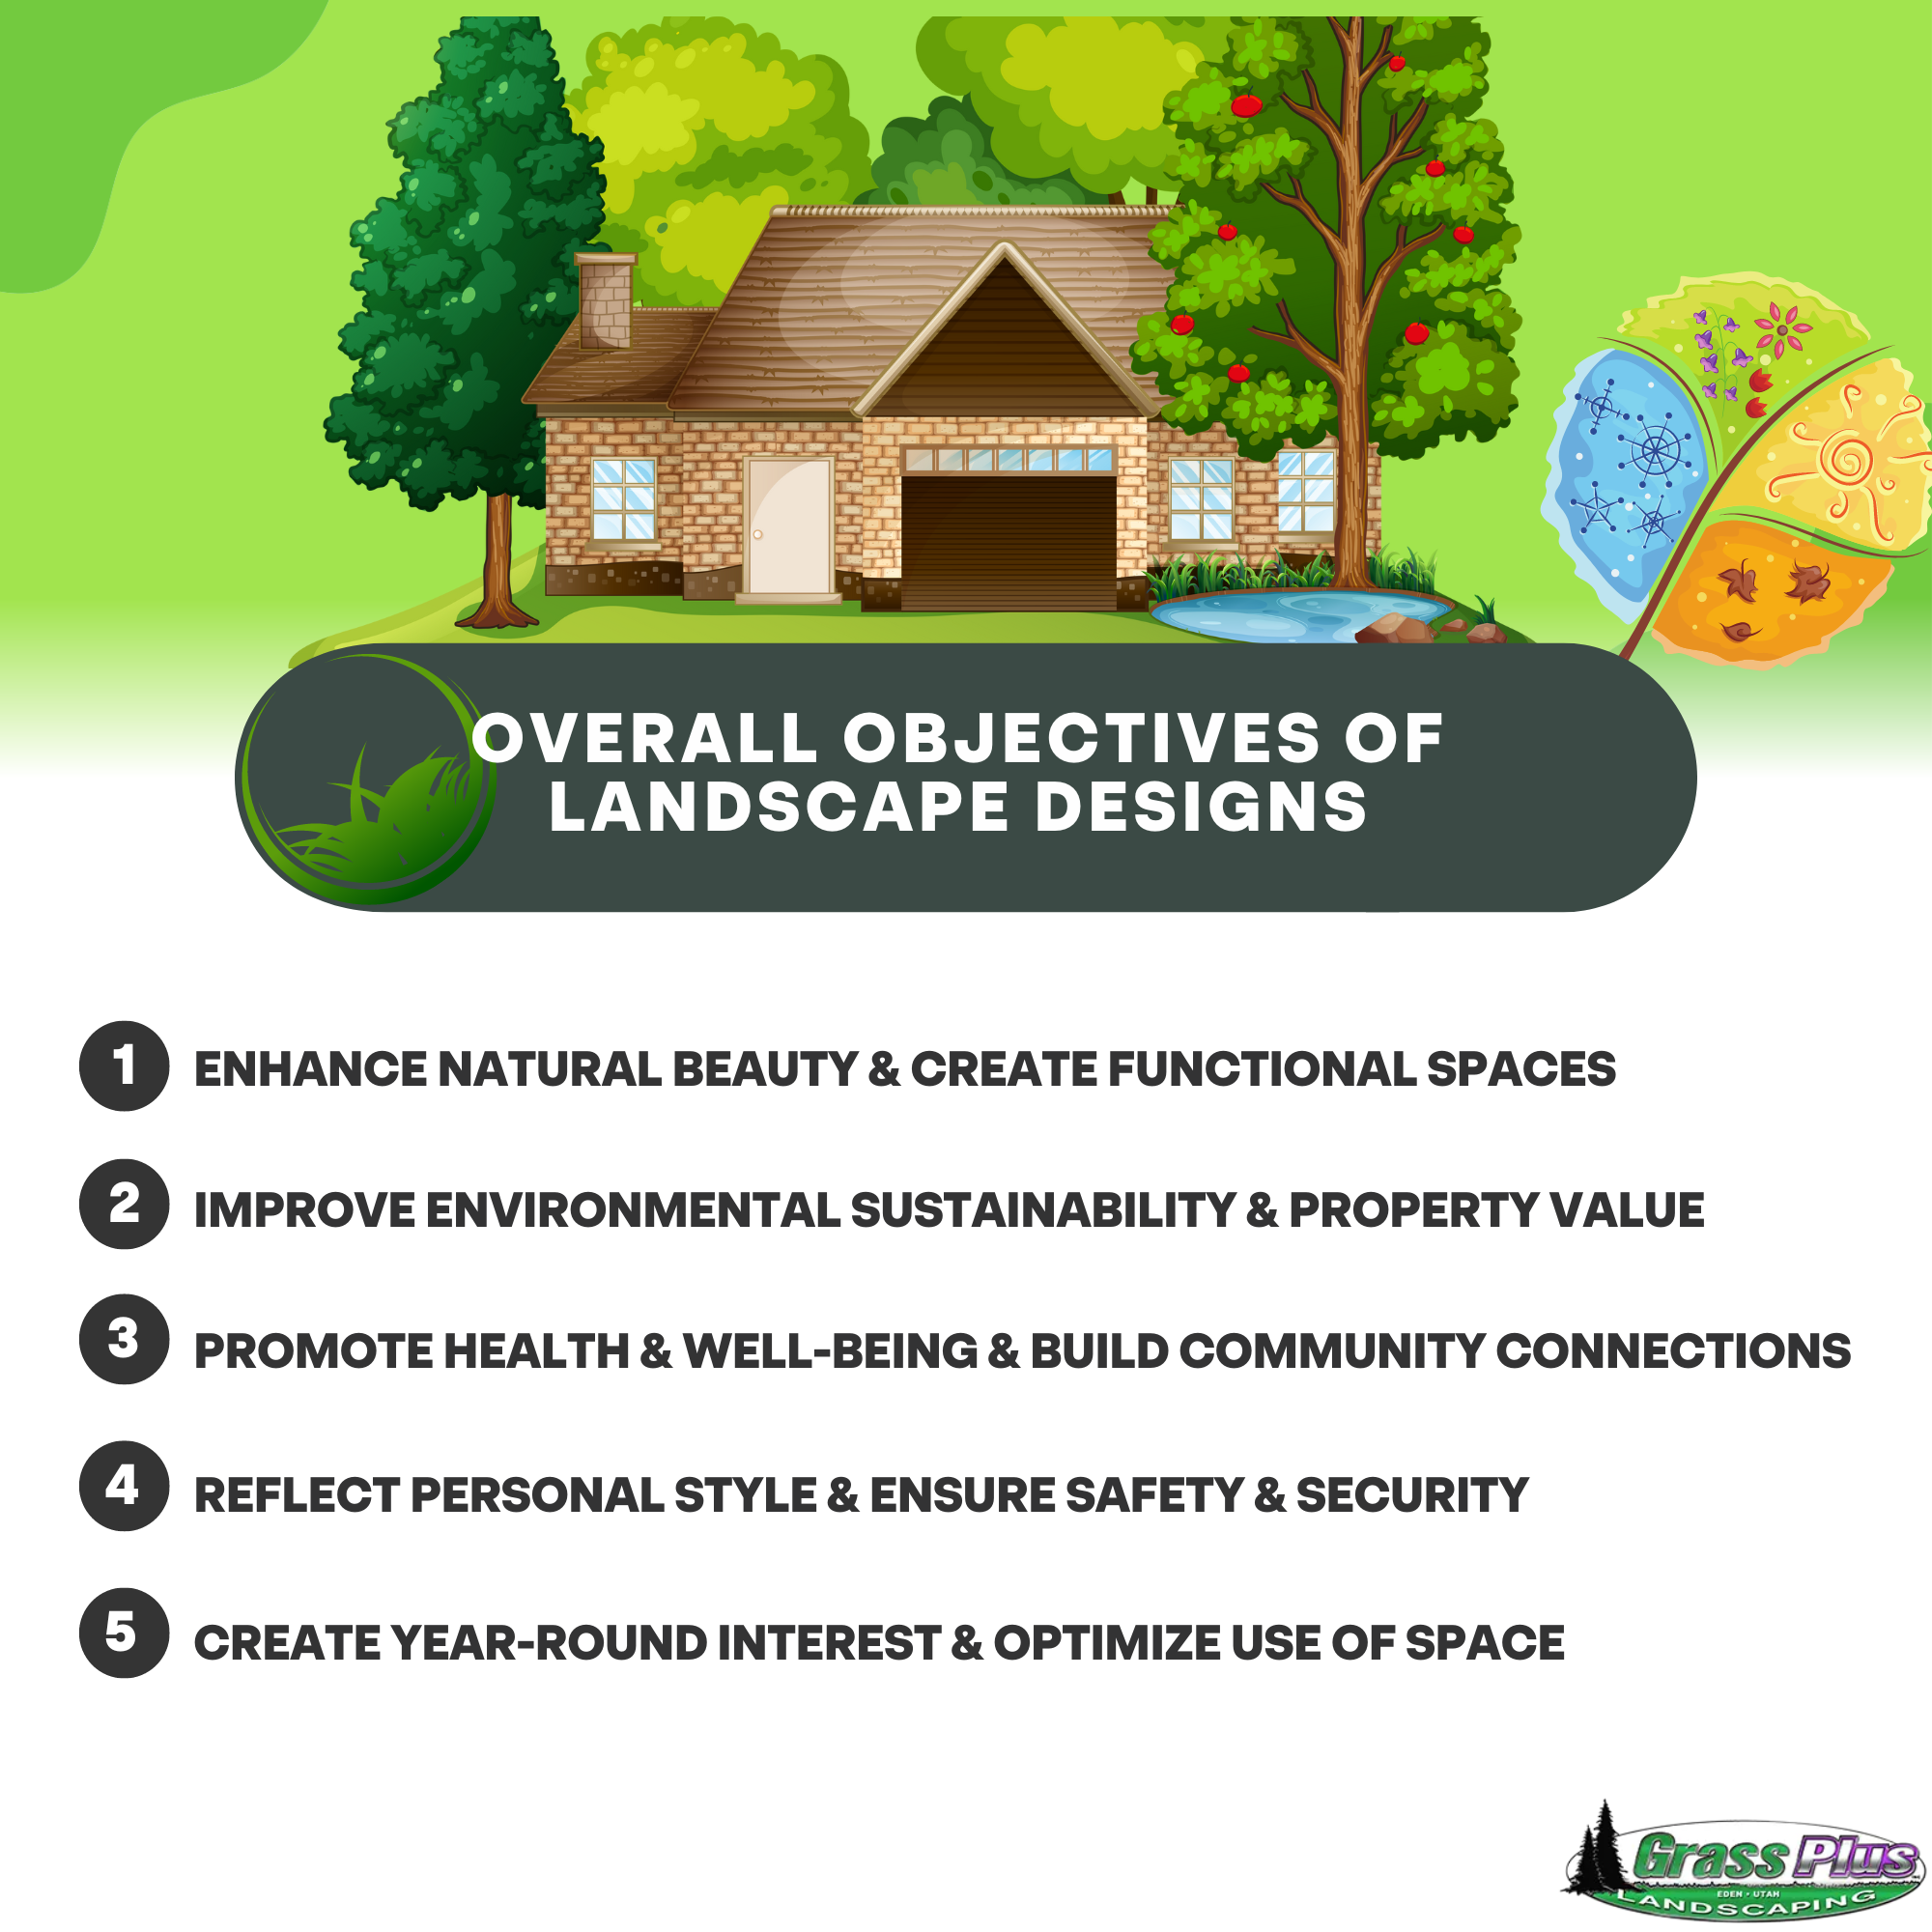 Overall Objectives of Landscape Designs